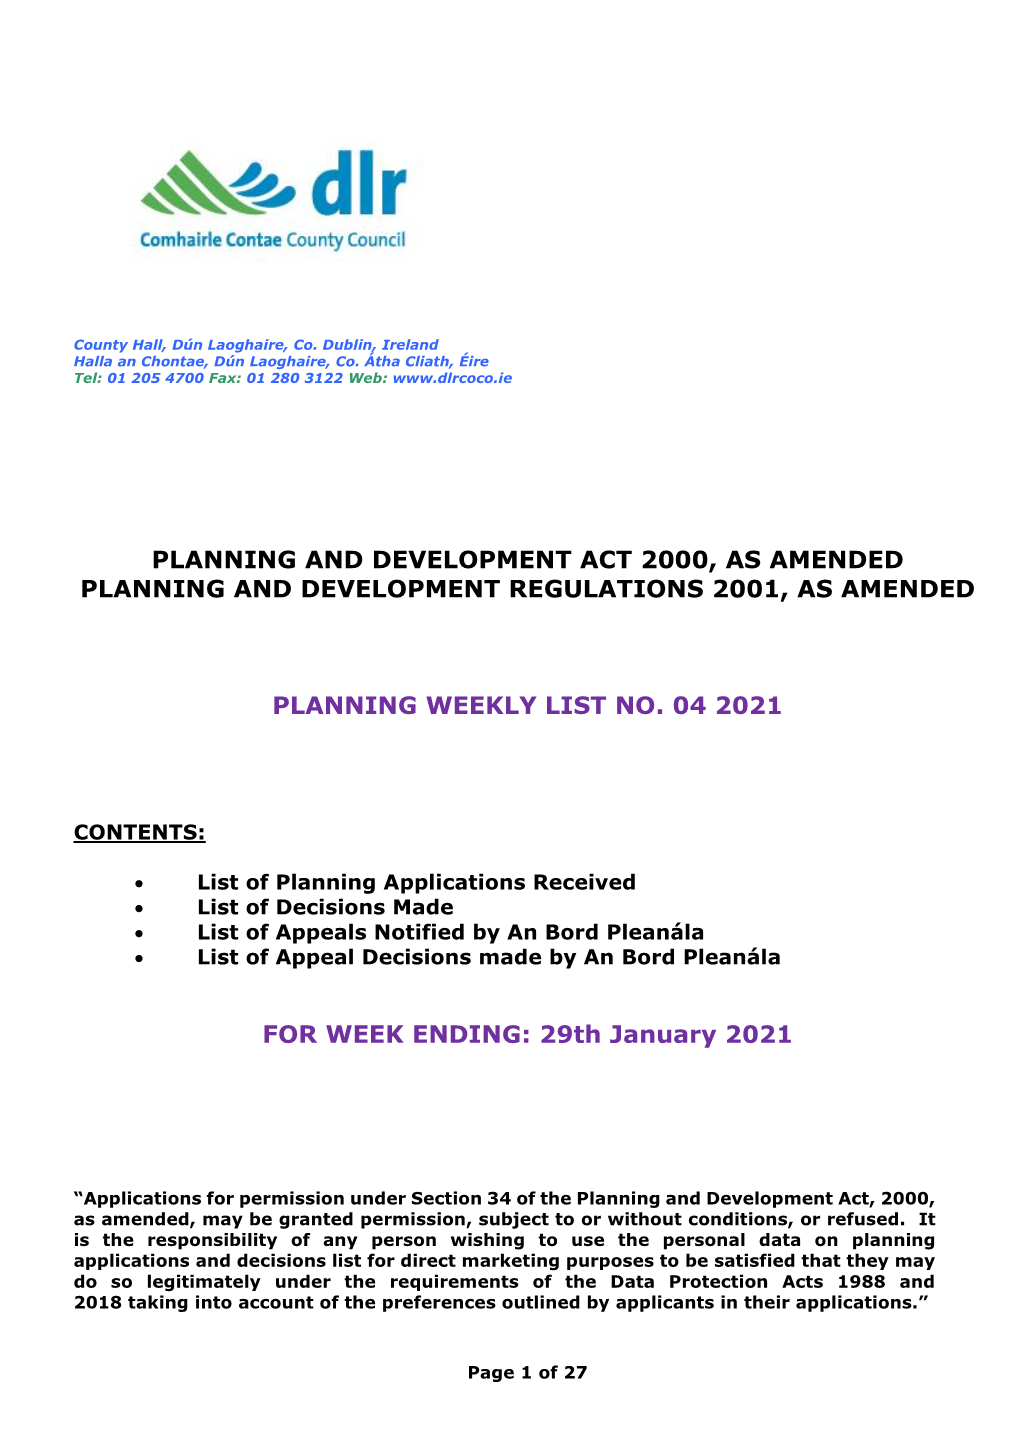 Planning and Development Act 2000, As Amended Planning and Development Regulations 2001, As Amended